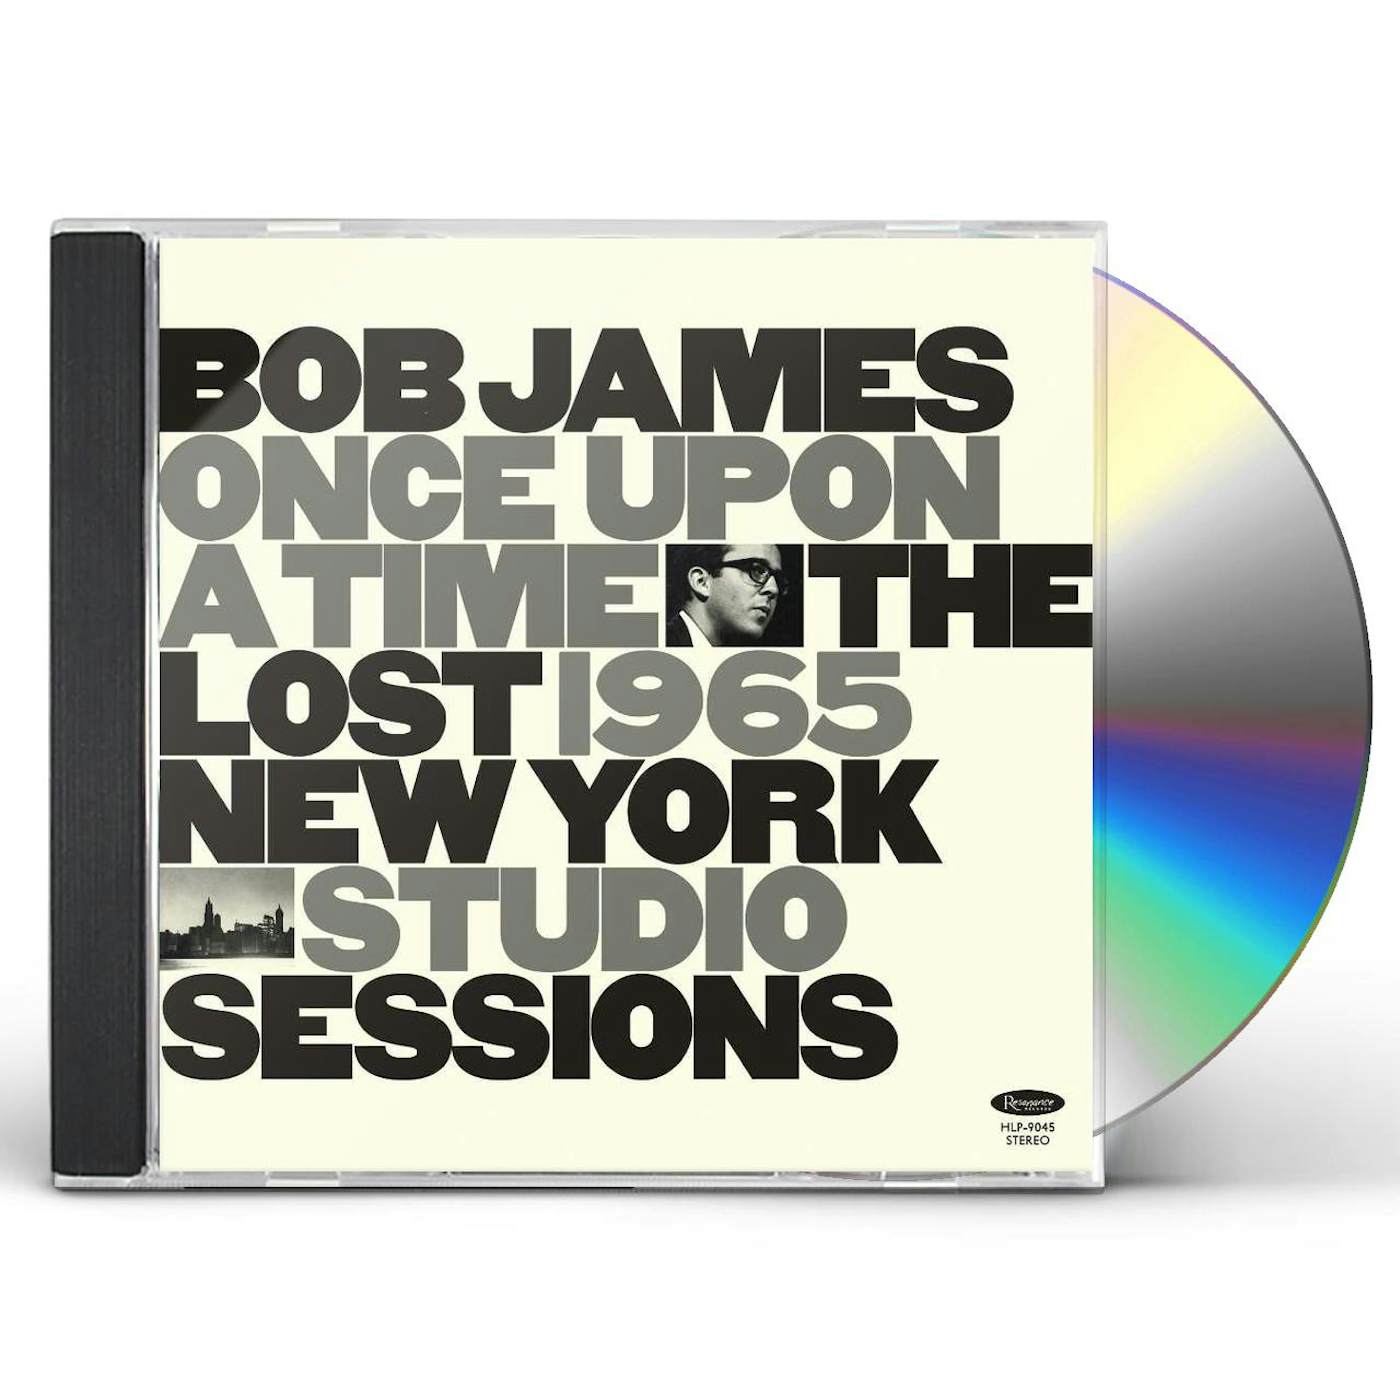 Bob James ONCE UPON A TIME: THE LOST 1965 NEW YORK STUDIO SESSIONS CD